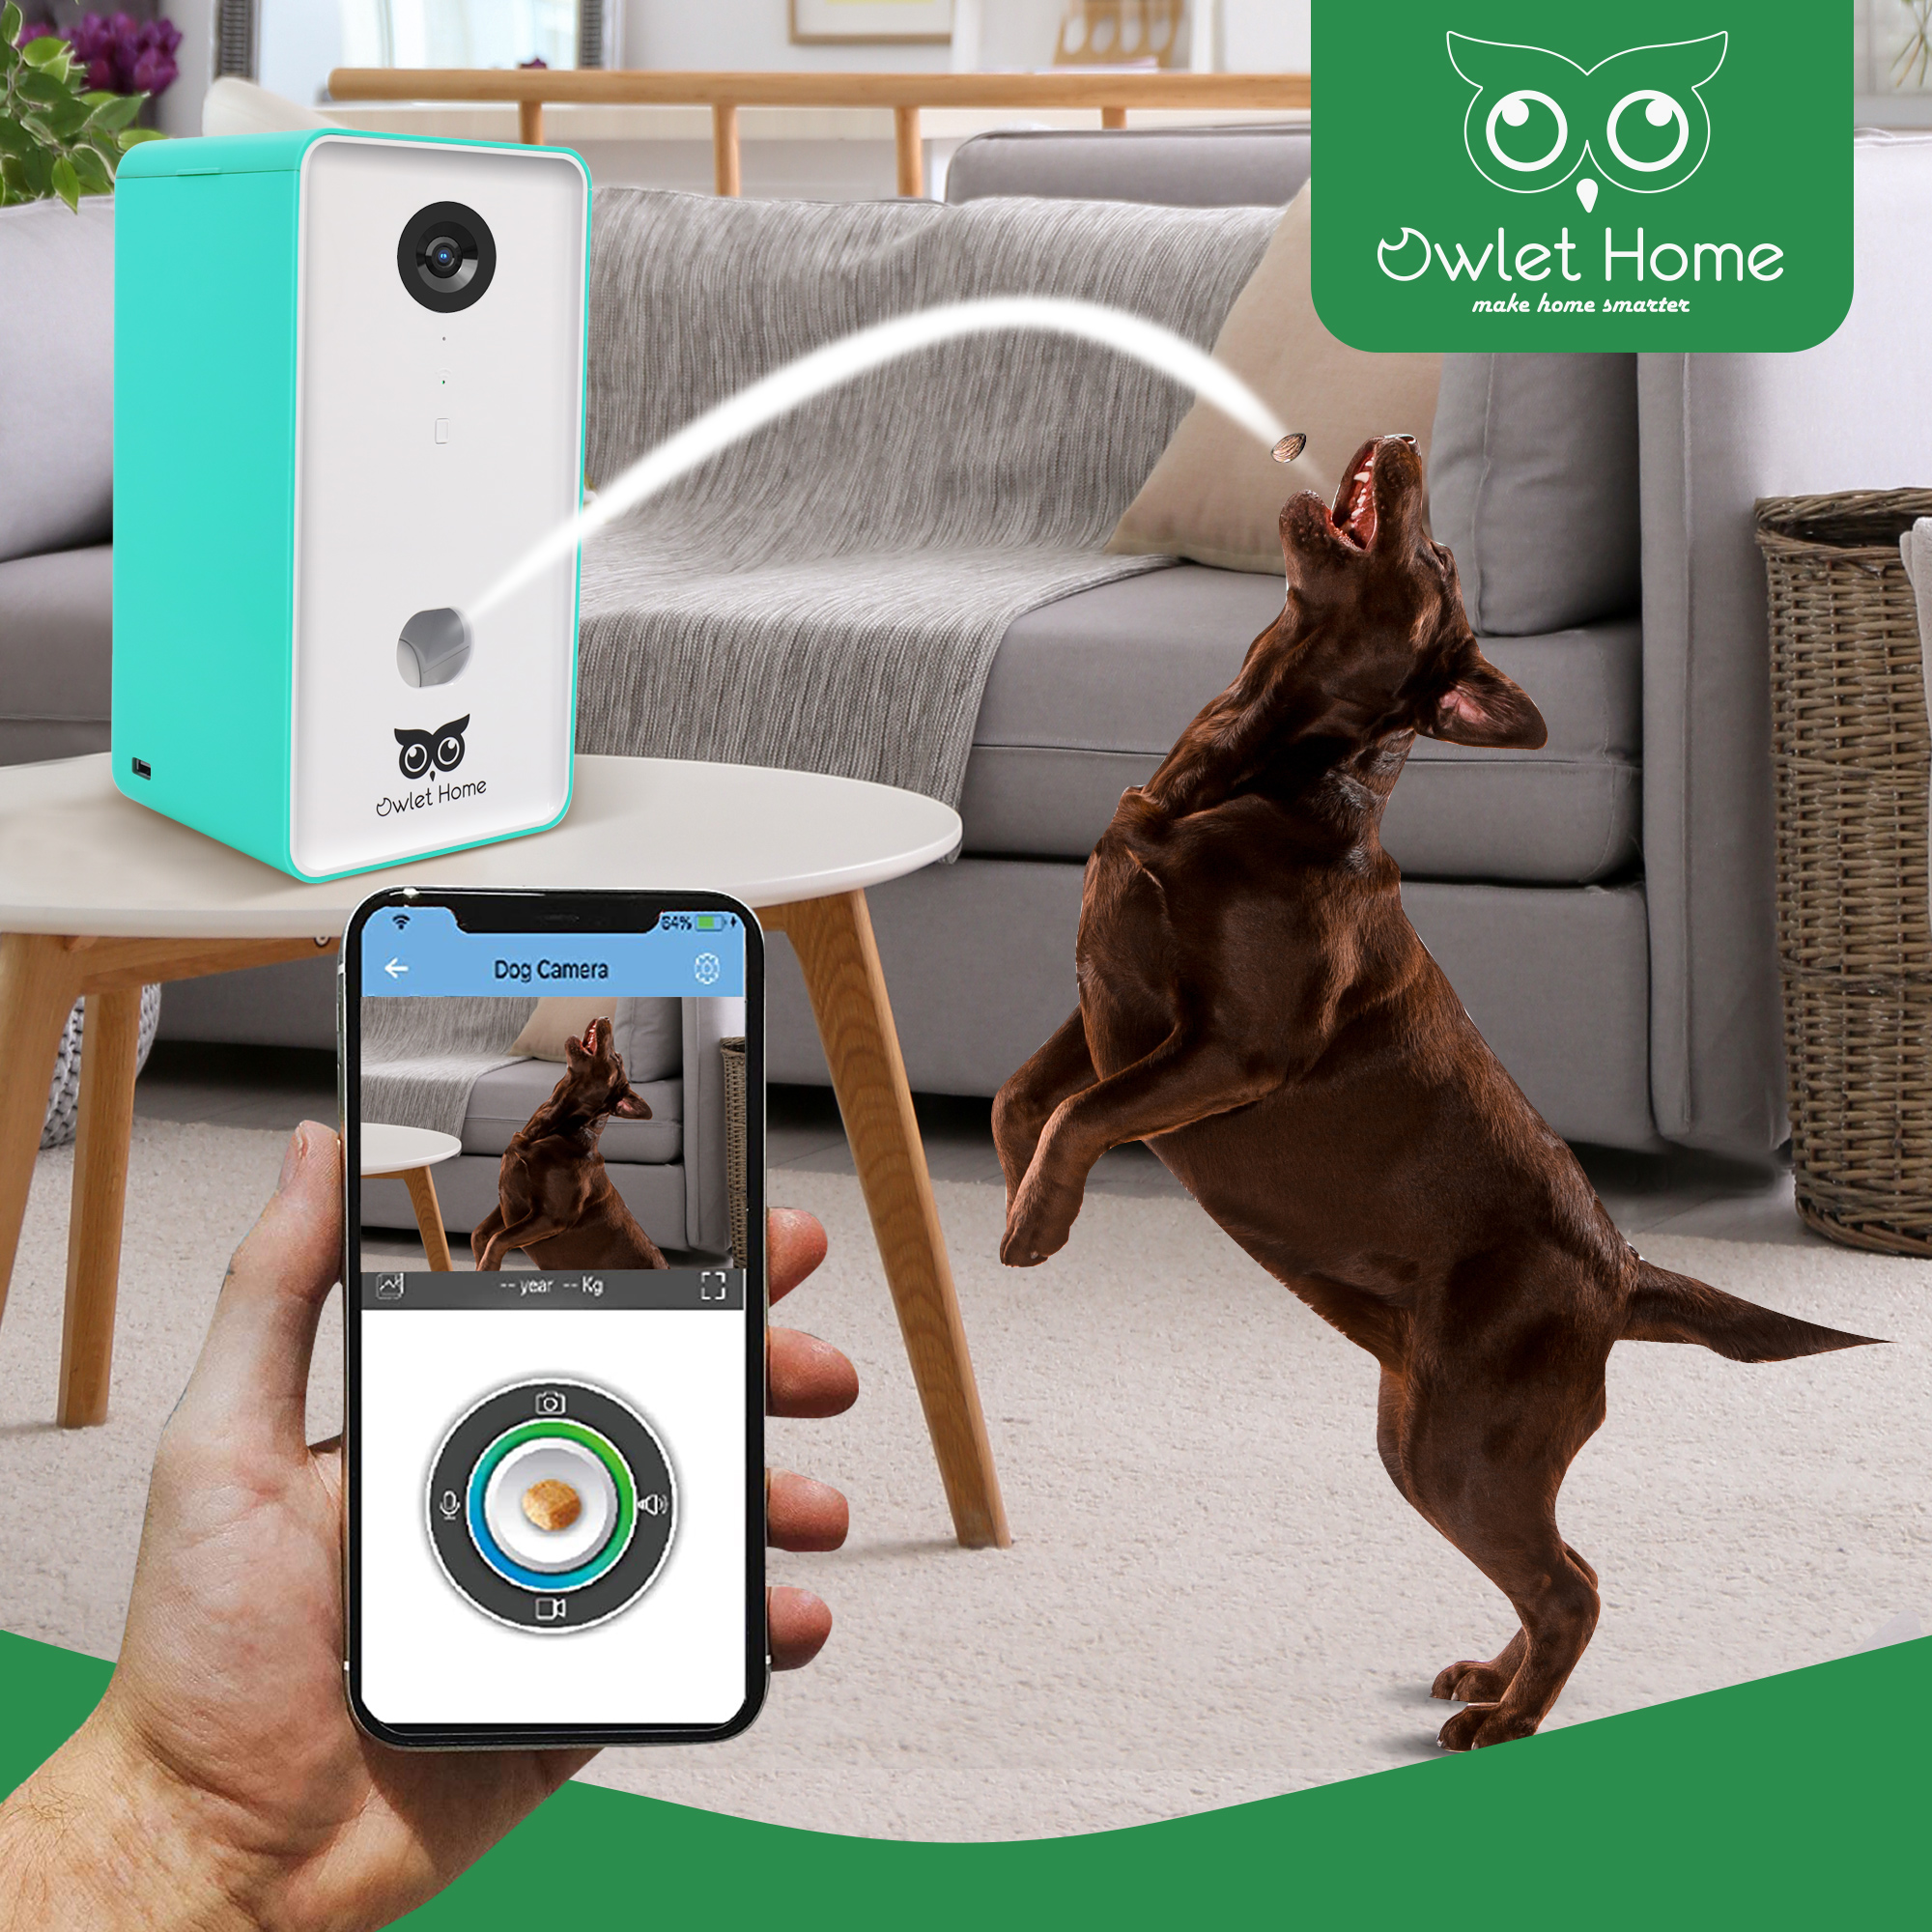 Owlet Home Smart Dog Camera with treat tossing(BLACK), WiFi connecting(2.4G  & 5G), 1080p HD Camera, Live Video Streaming, Auto Night Vision, 2-Way